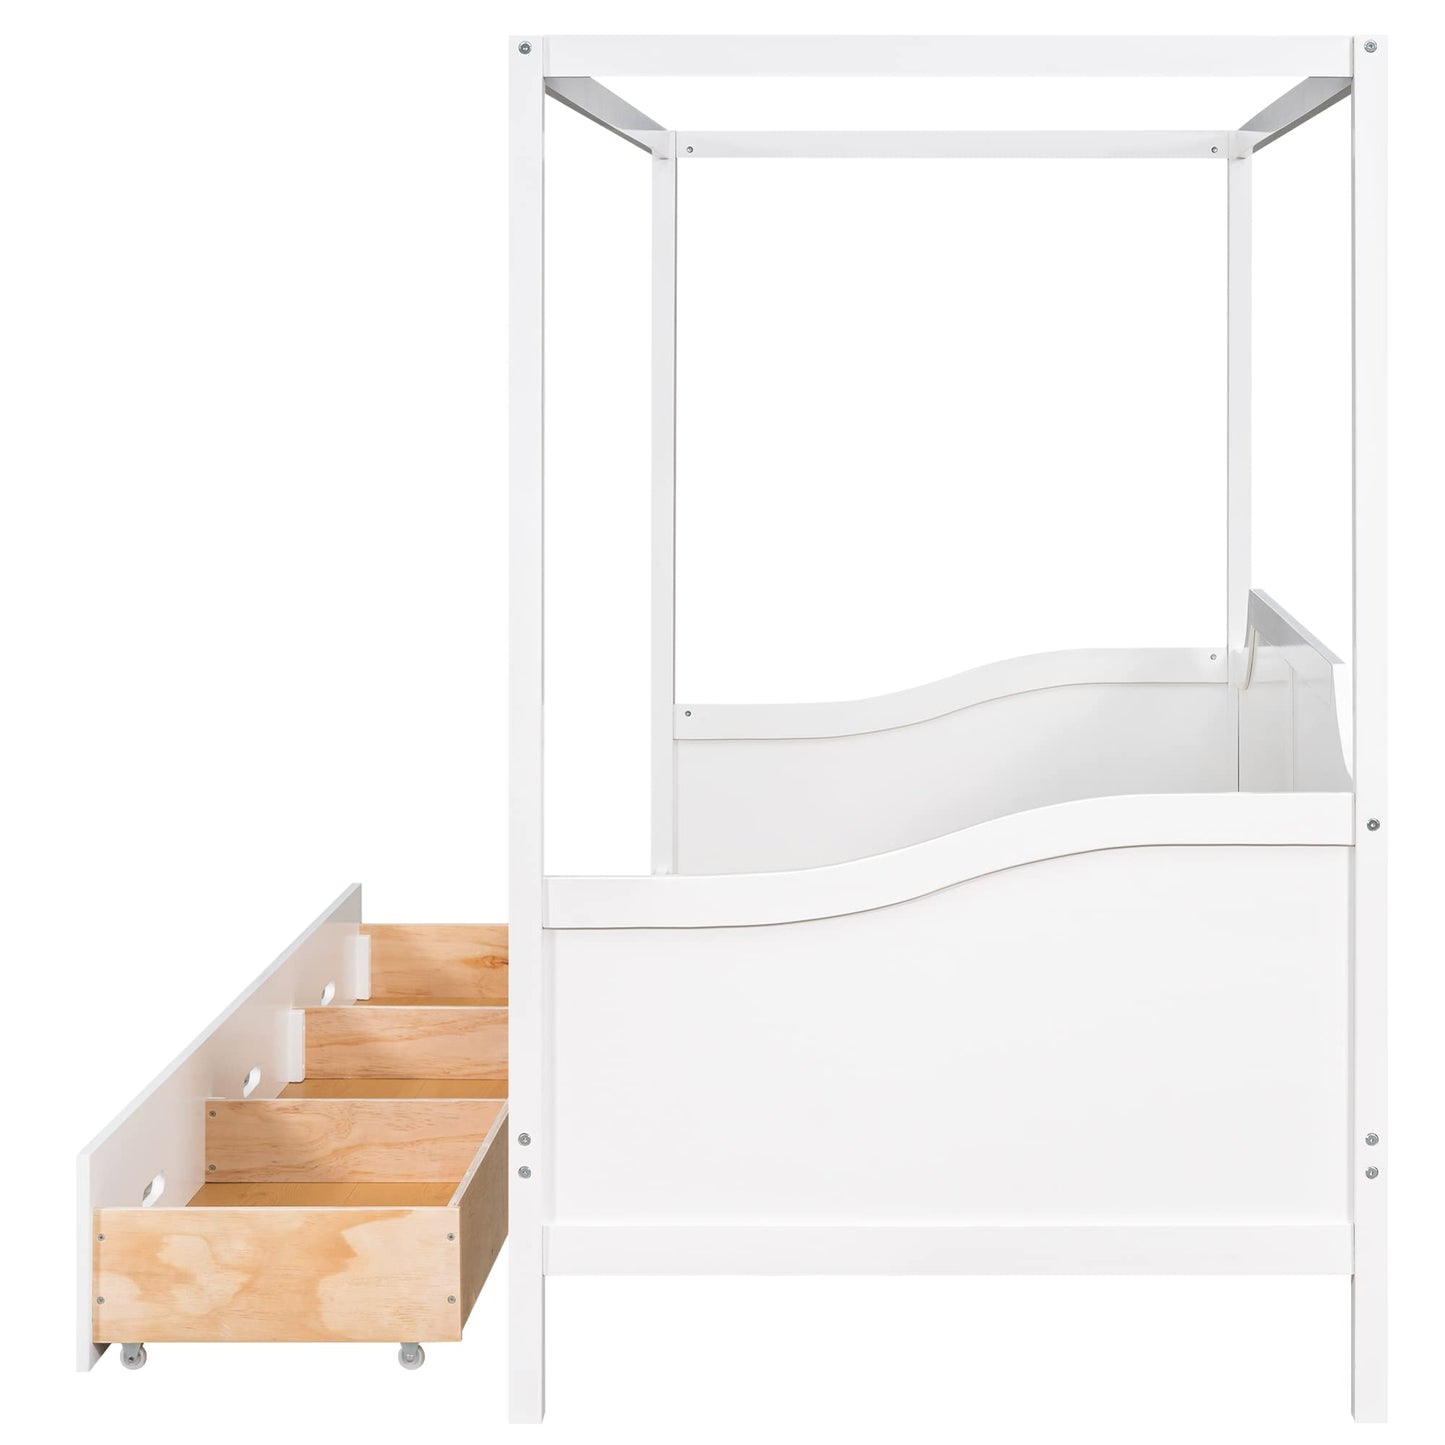 Polibi Wooden Daybed, Twin Size Canopy Daybed with 3 in 1 Drawers (White)